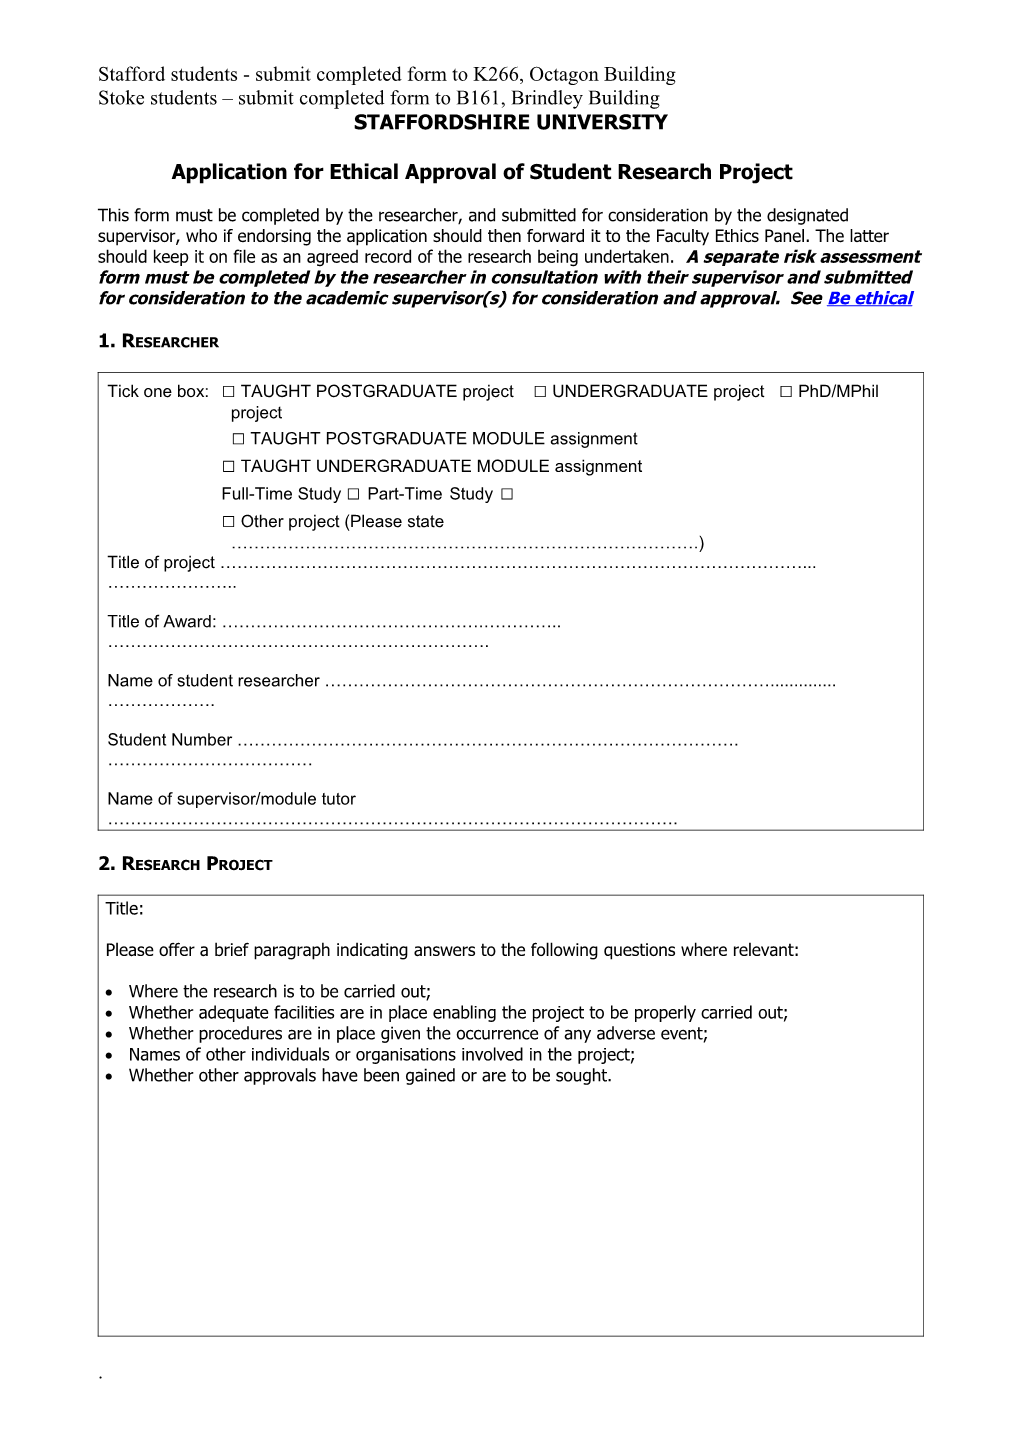 Application for Ethical Approval of Student Research Project